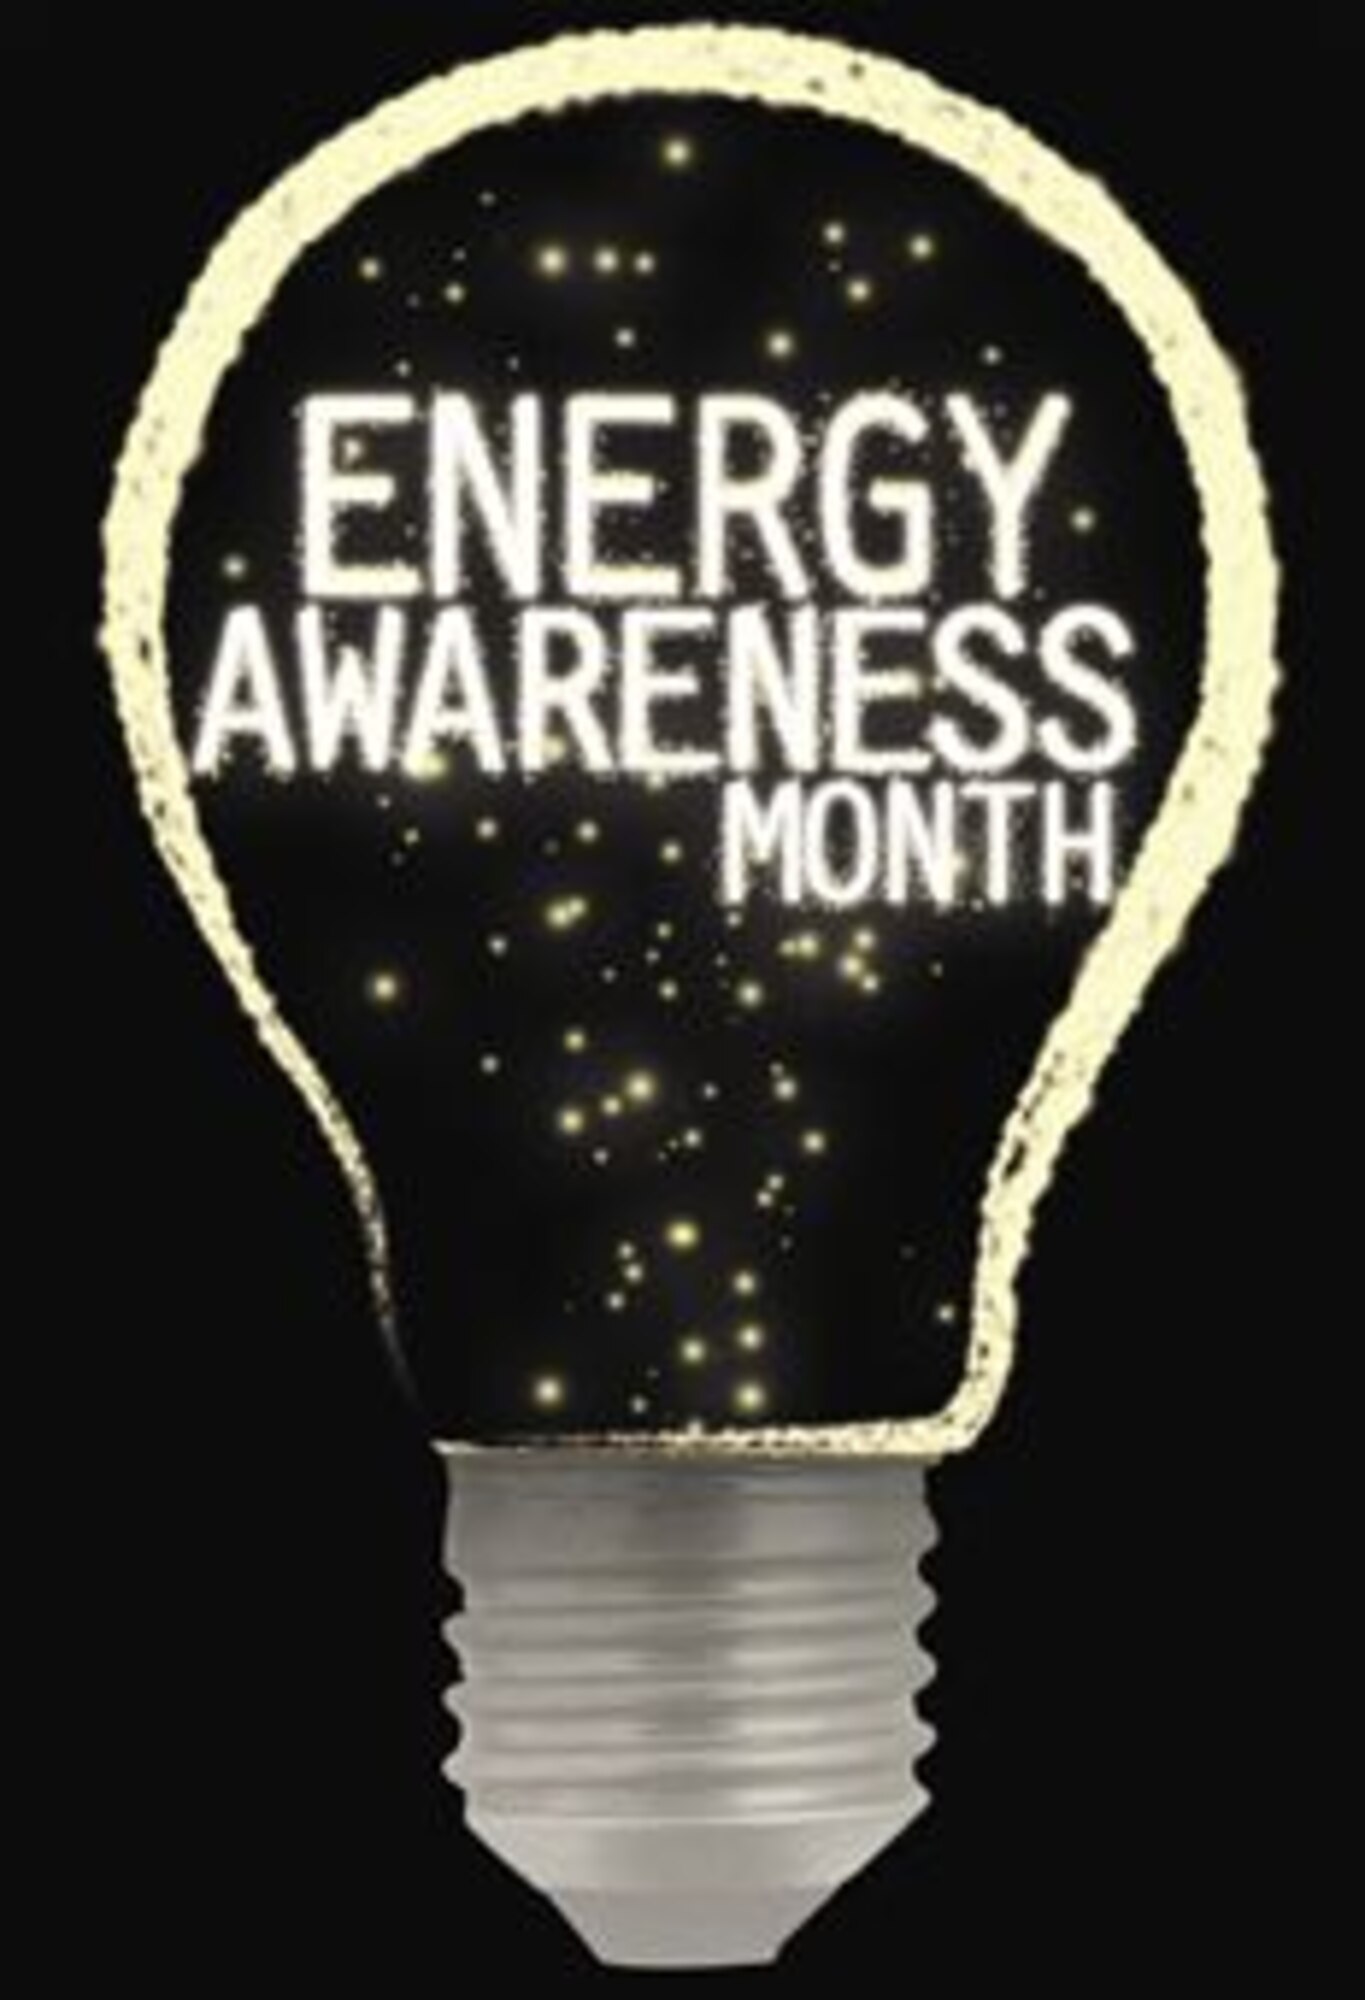 According to the U.S. Department of Energy, the Federal Government first set aside time to raise energy awareness in 1981 with American Energy Week, which was observed from 1981 through 1985. It became a month-long observance at the U.S.  DOE in 1986. On September 13, 1991, President George Bush proclaimed October as Energy Awareness Month. Since then, DOE has been conducting energy awareness campaigns each year that promote the wise and efficient use of our nation's energy.

